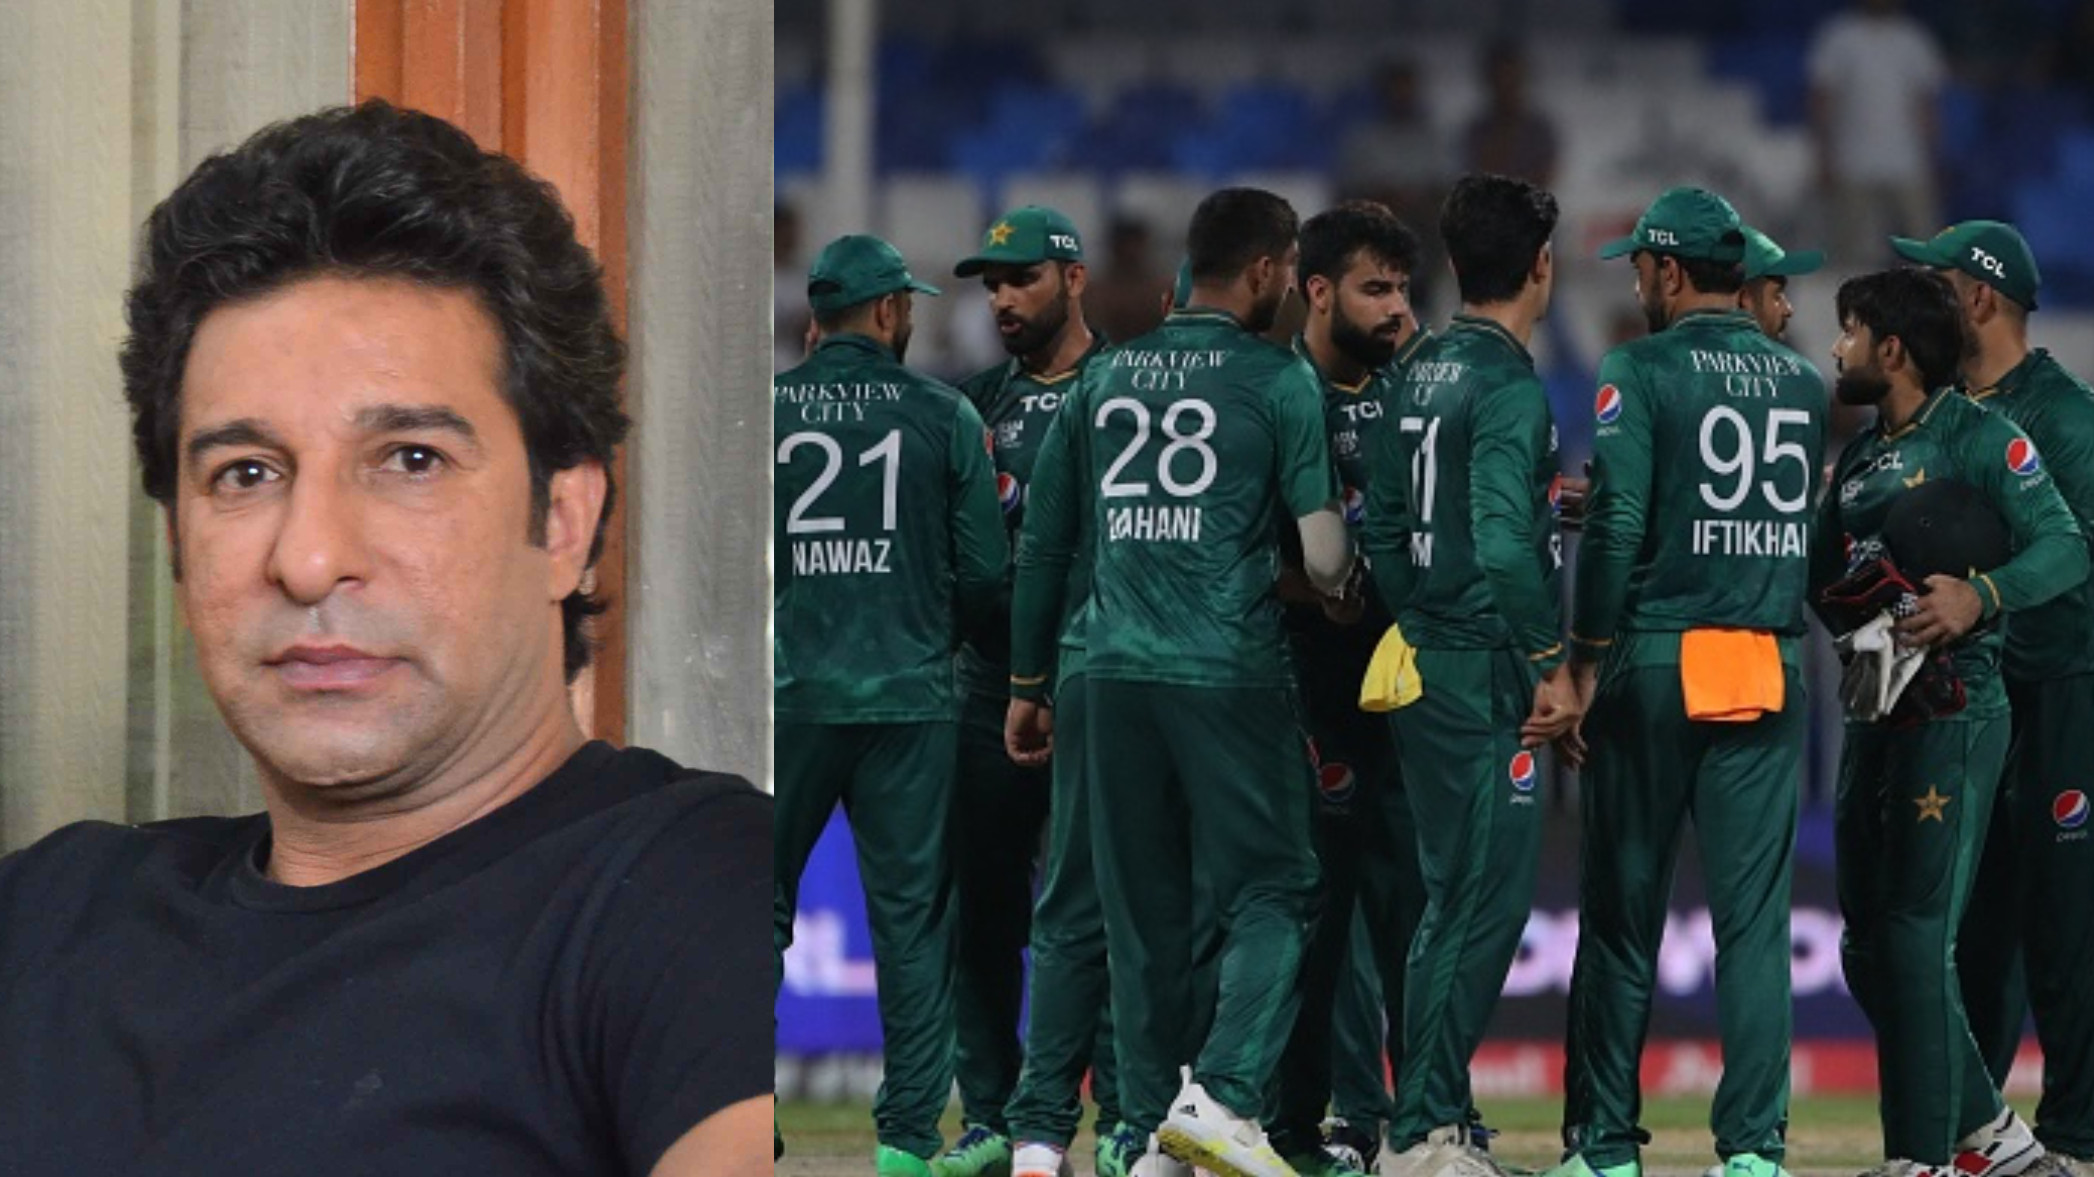 Asia Cup 2022: Pakistan needs to get out of the losing mindset- Wasim Akram ahead of India match